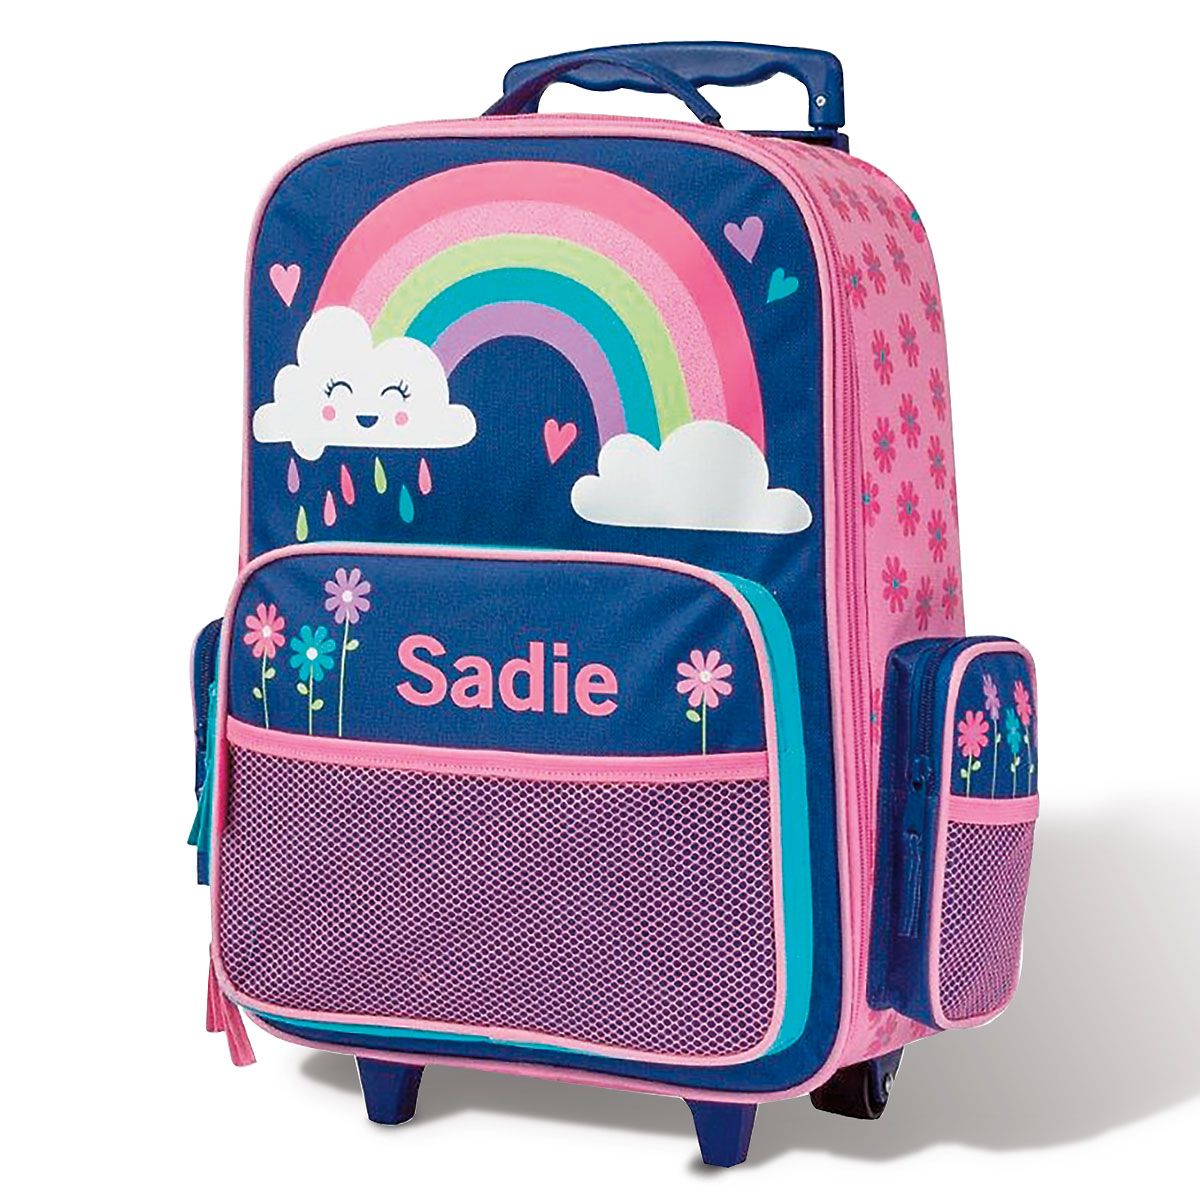 Kids Personalized Rainbow Carry-on Luggage | Lillian Vernon